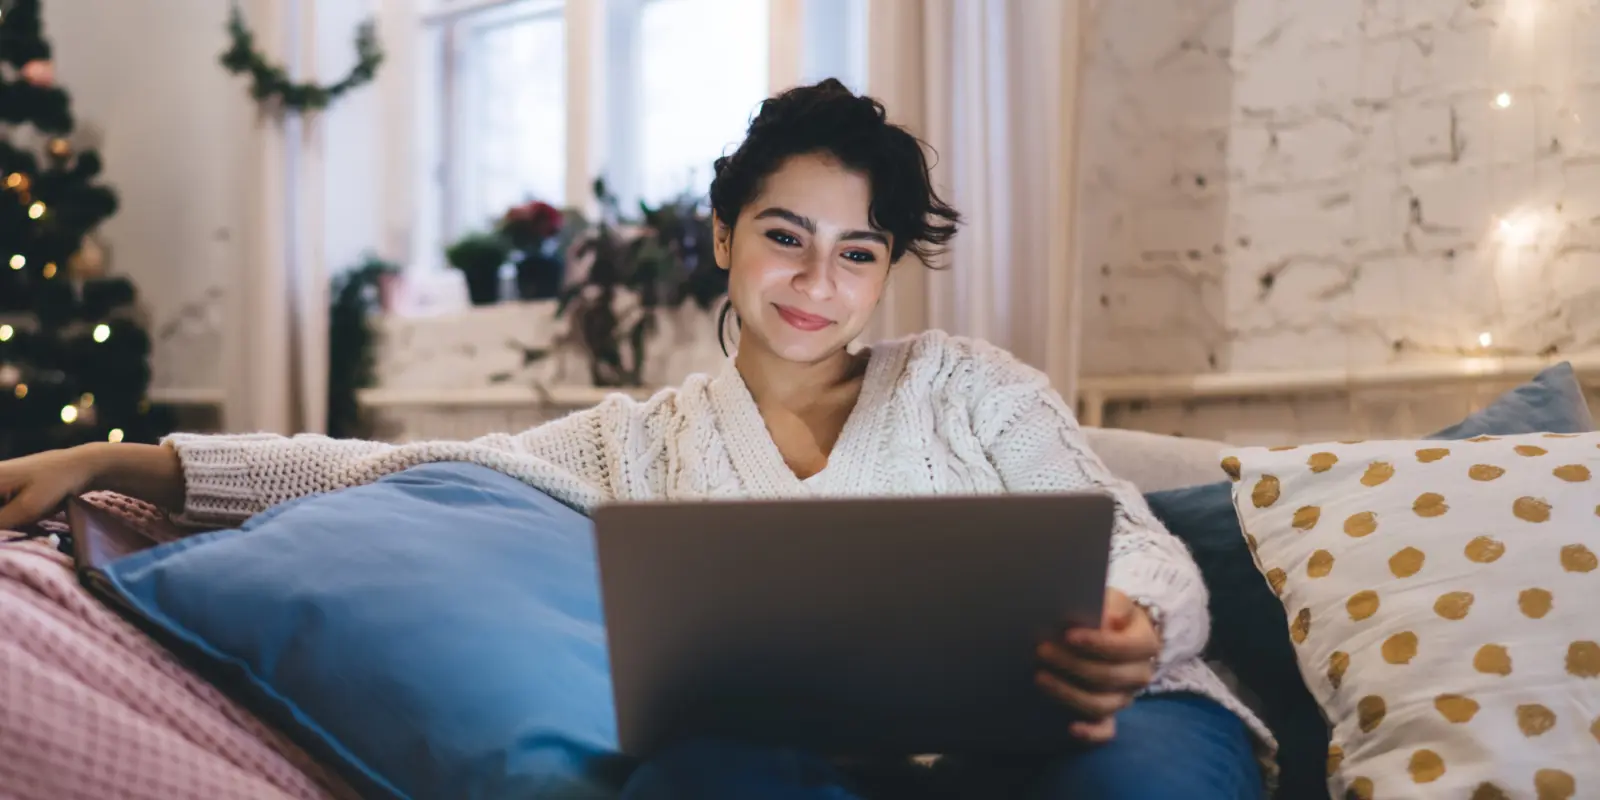 Woman looking at a laptop while sitting on the couch.